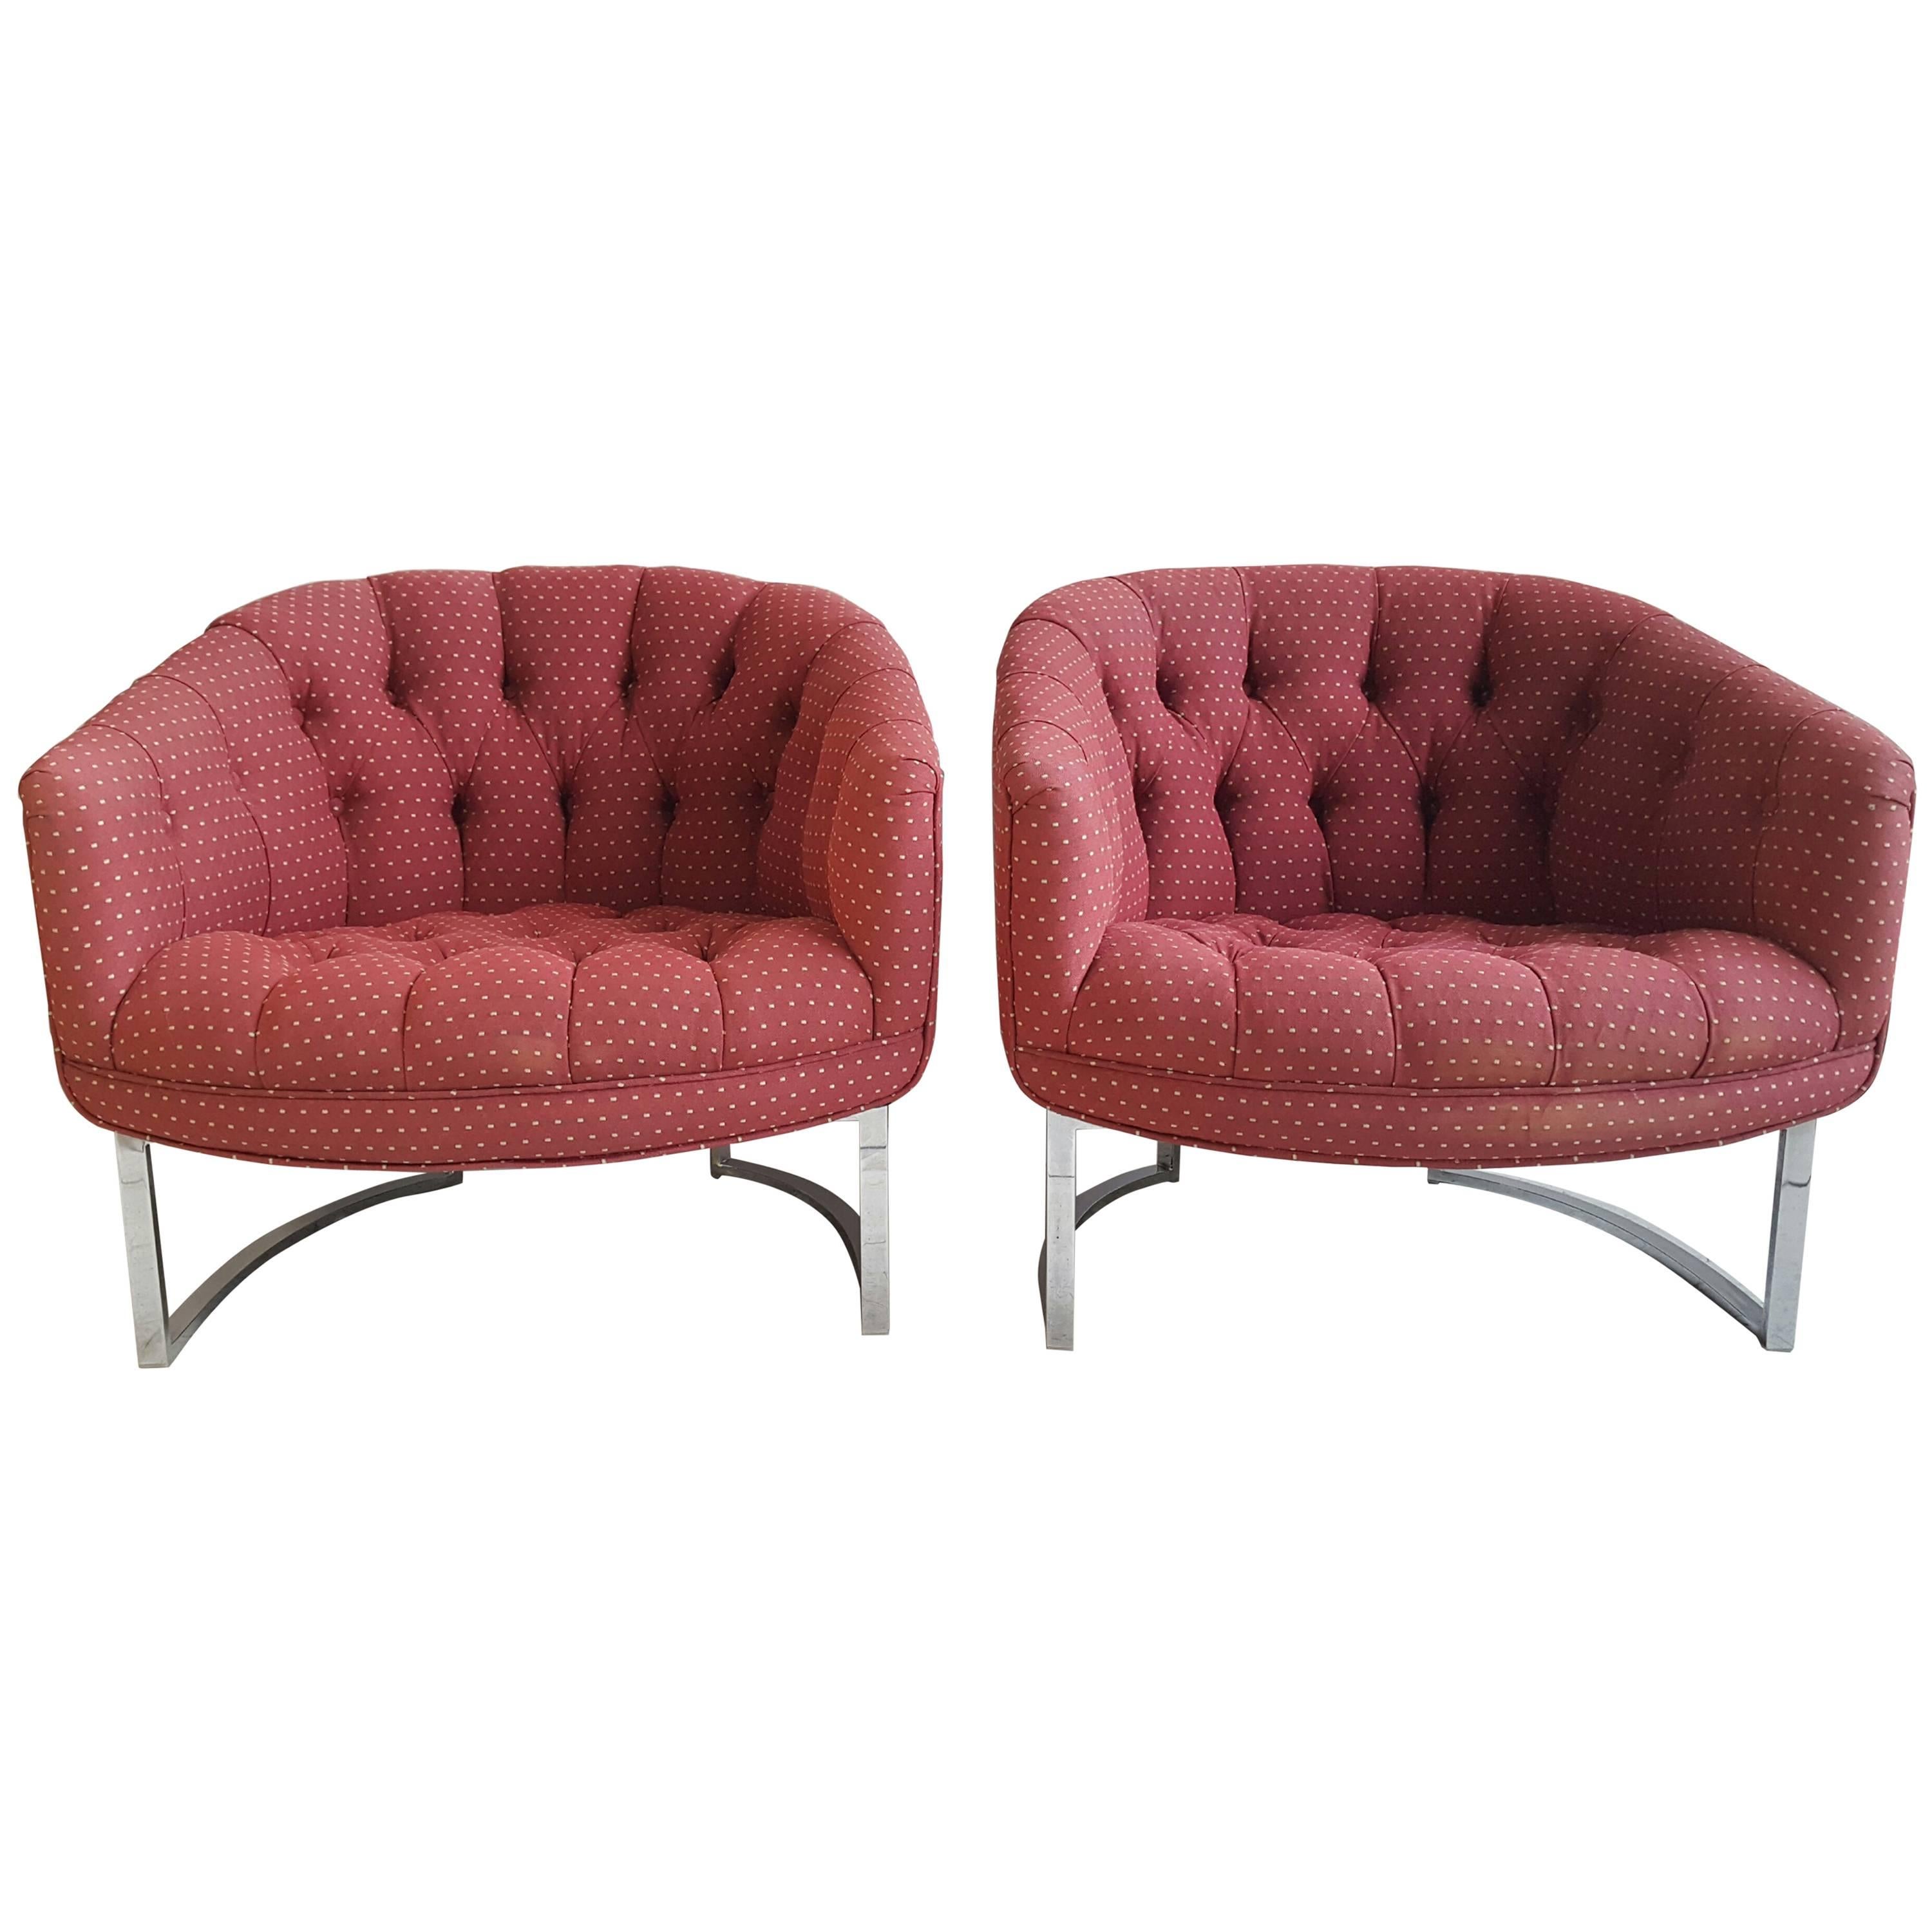 Pair of Chrome and Fabric Button Tufted Milo Baughman Barrel Chairs